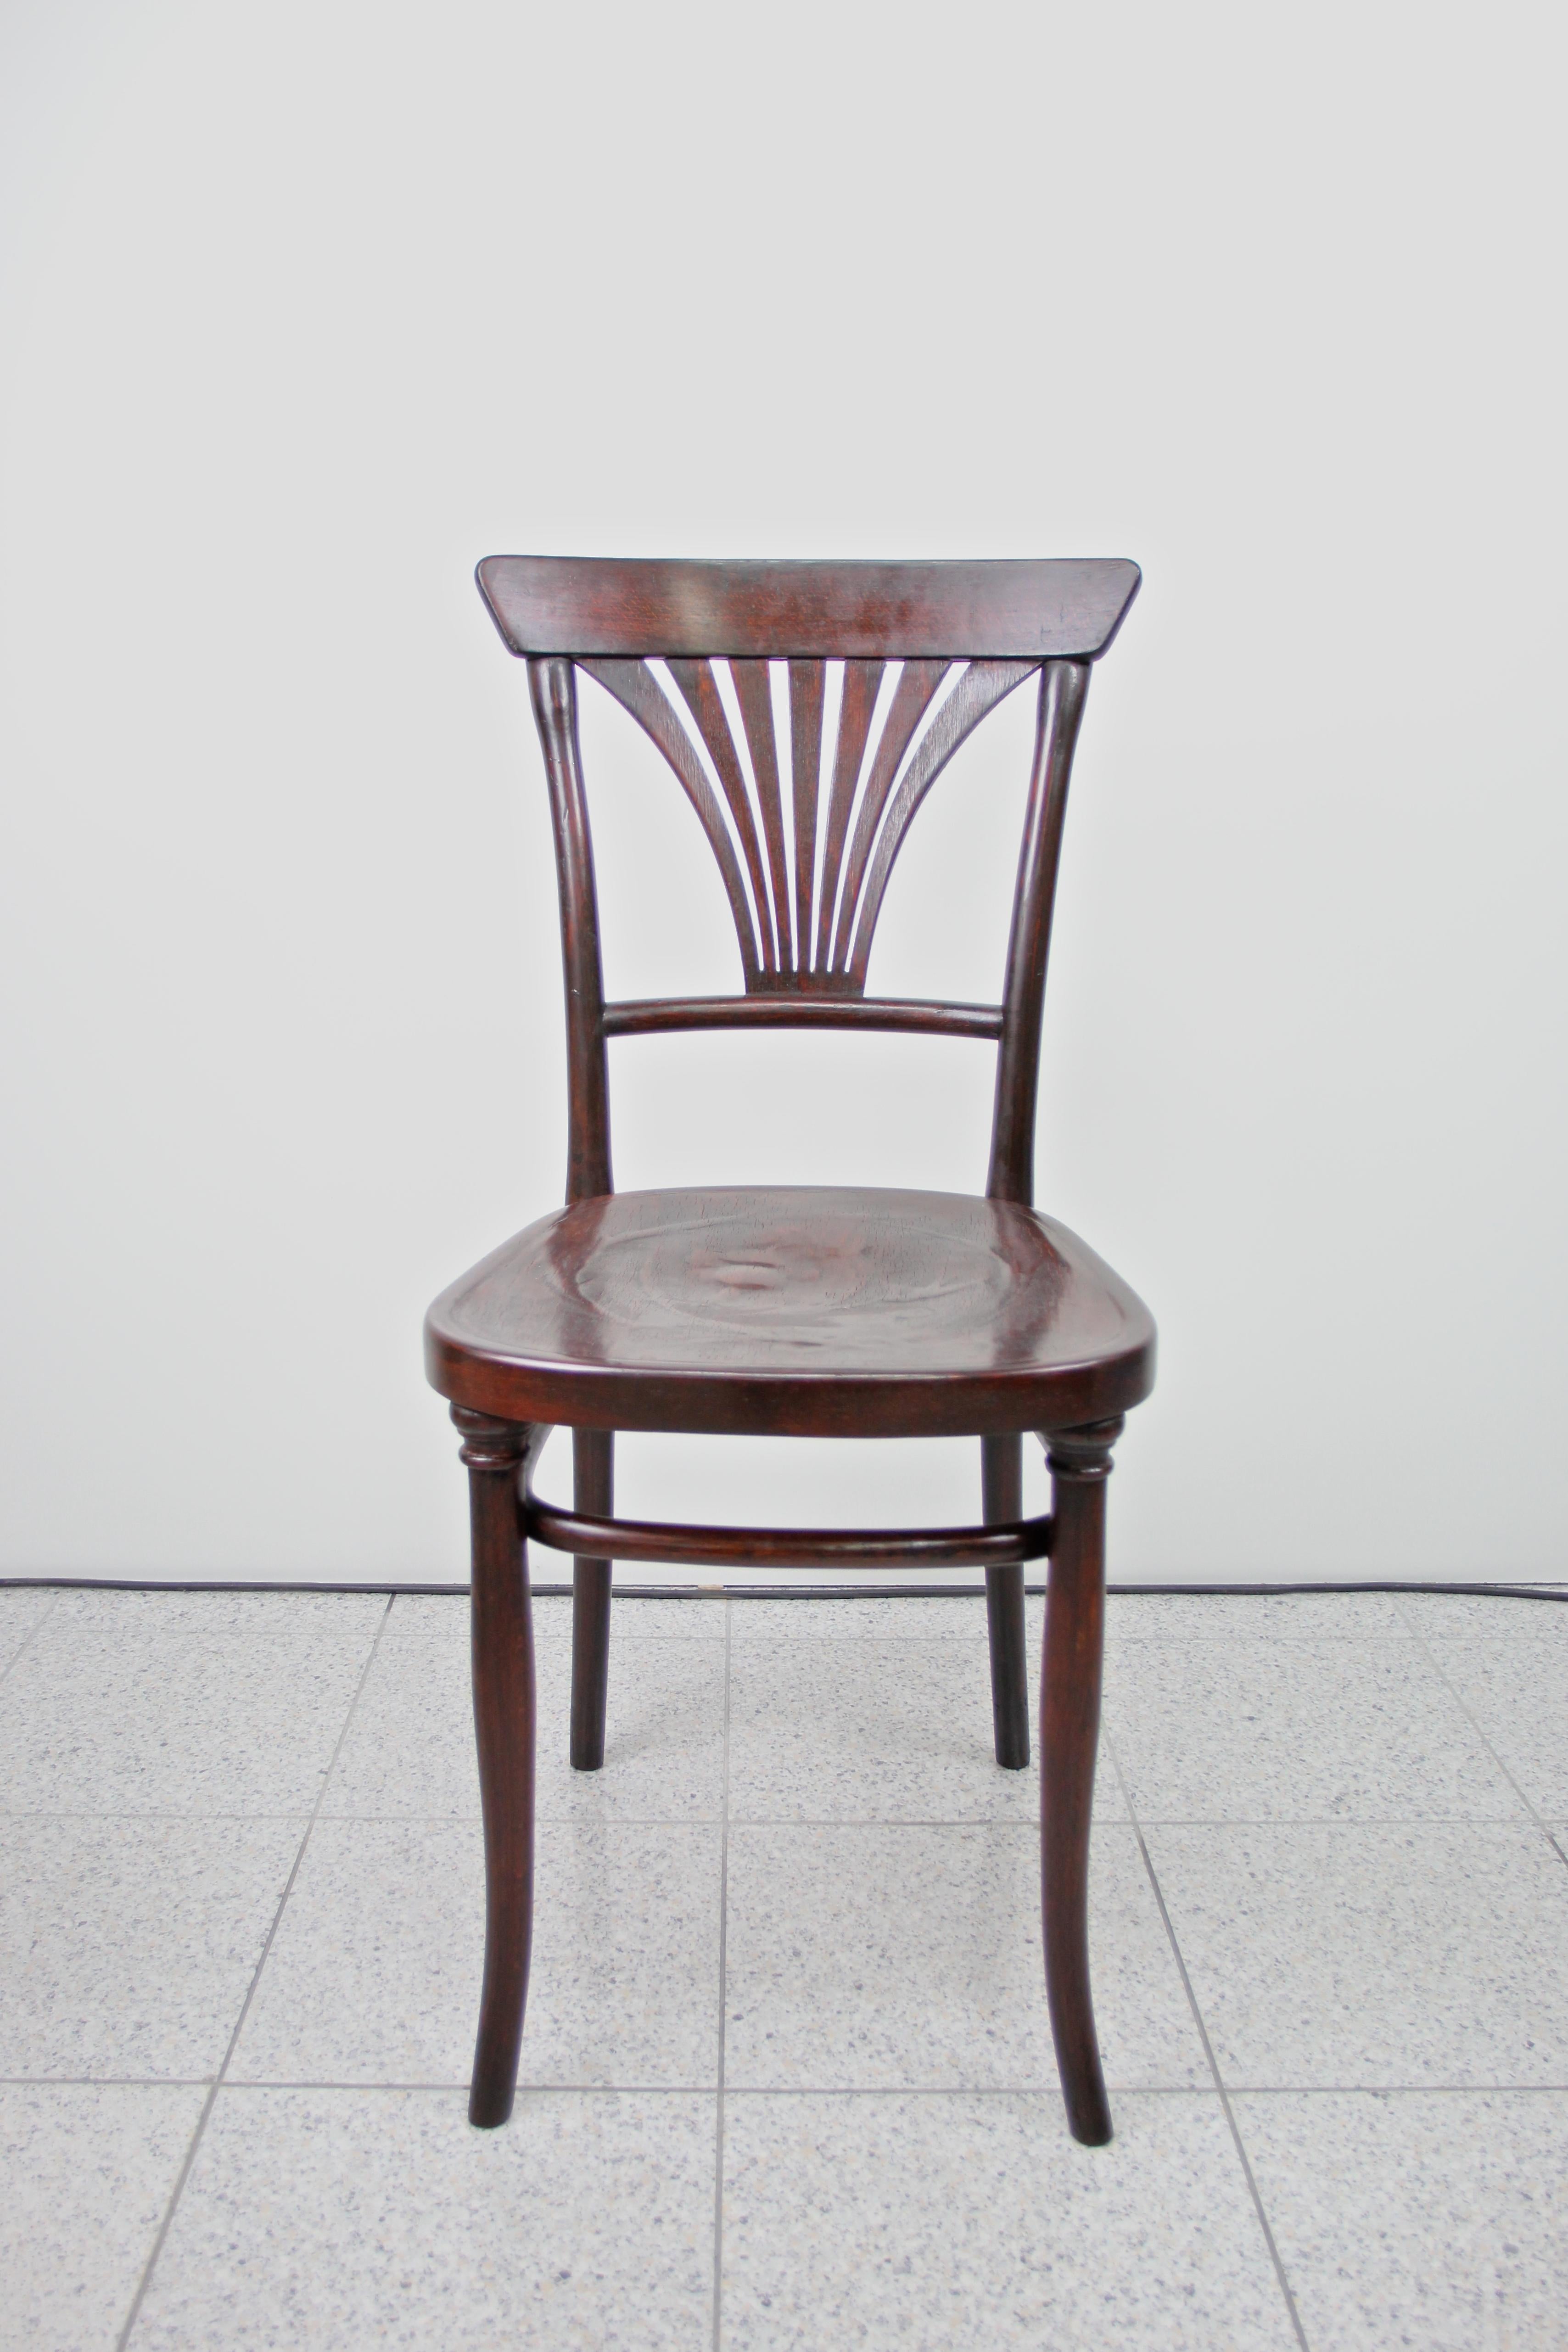 Embossed Thonet Bentwood Chair No. 221 Special Edition Mahogany Look, Austria, circa 1910